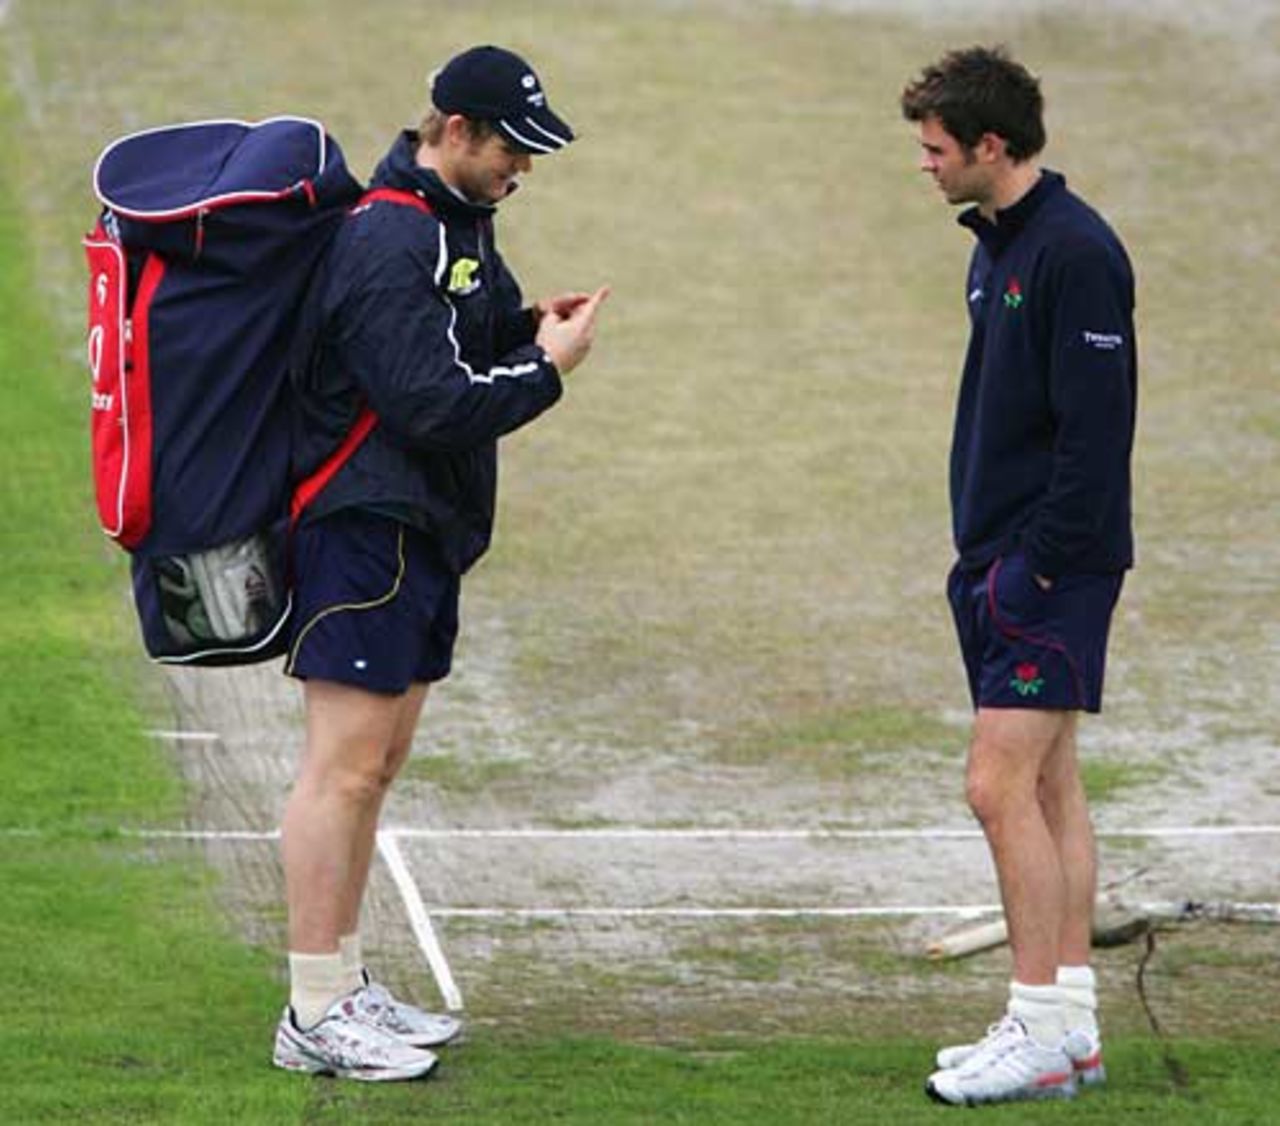 Matthew Hoggard and James Anderson have a chat, Lancashire v Yorkshire, County Championship, Old Trafford, July 8, 2007